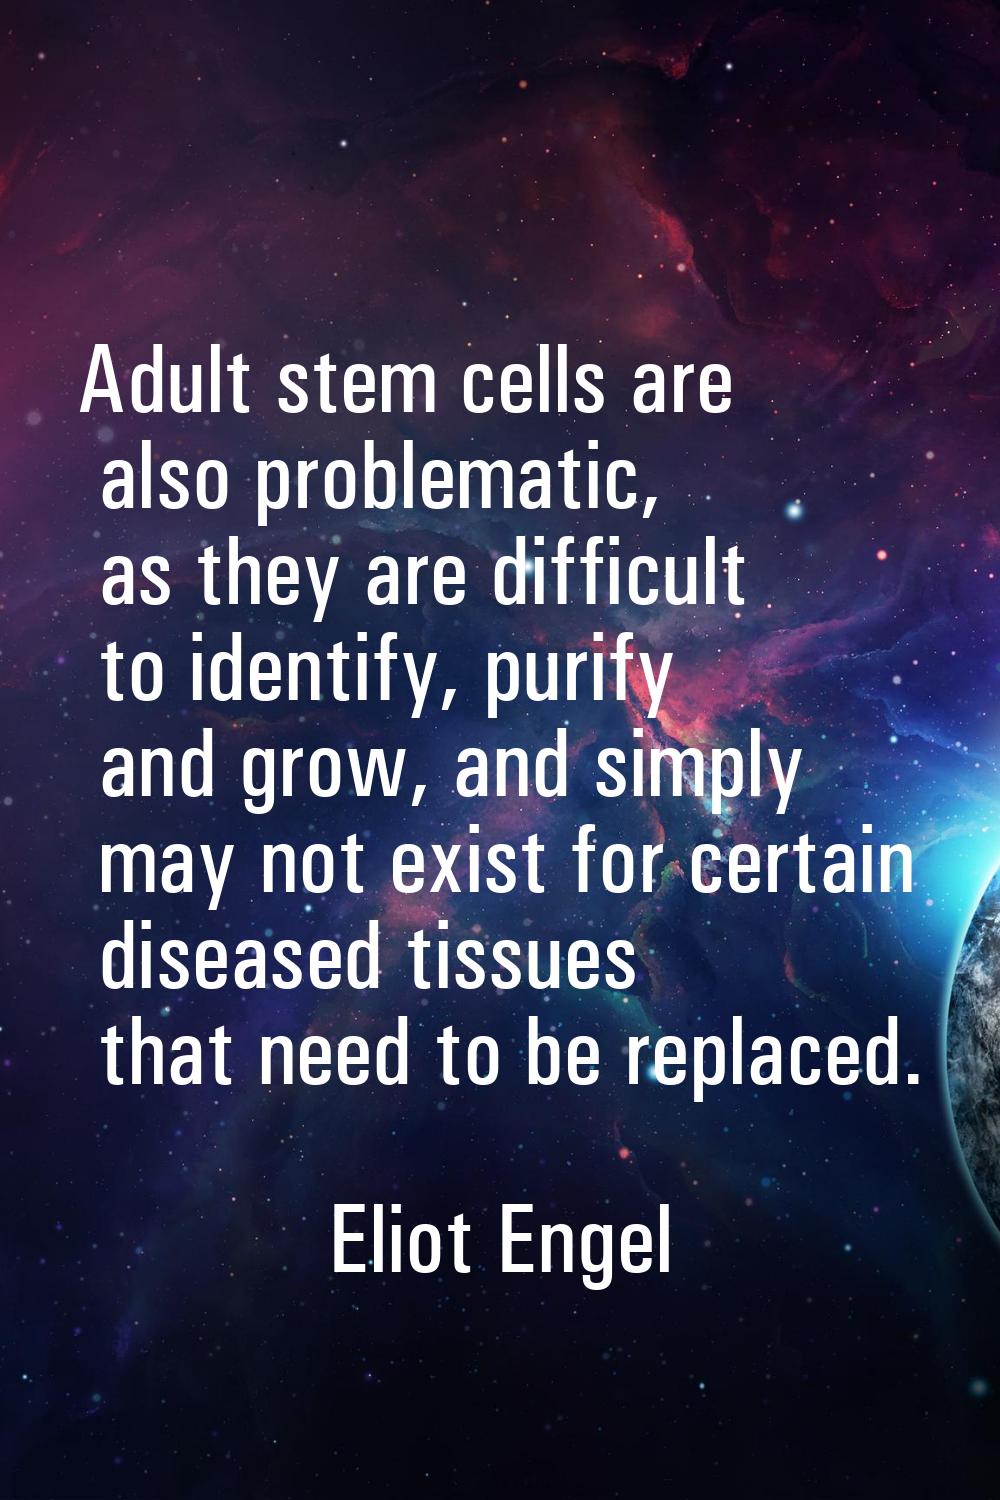 Adult stem cells are also problematic, as they are difficult to identify, purify and grow, and simp